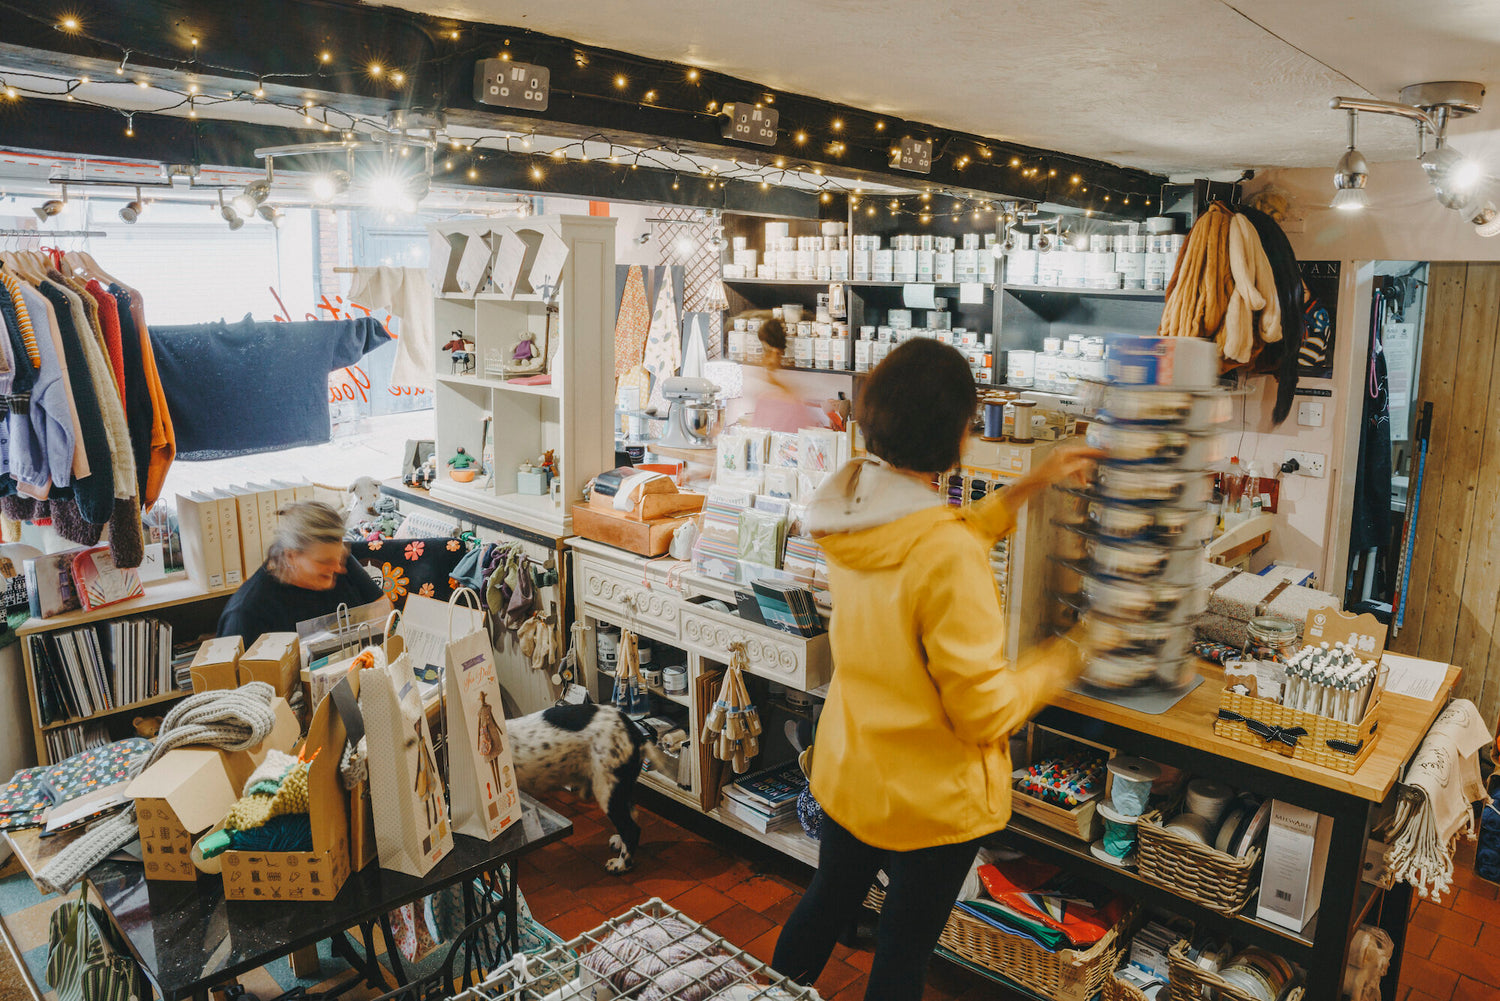 ❄ Shop Locally with Stitch this Winter ❄